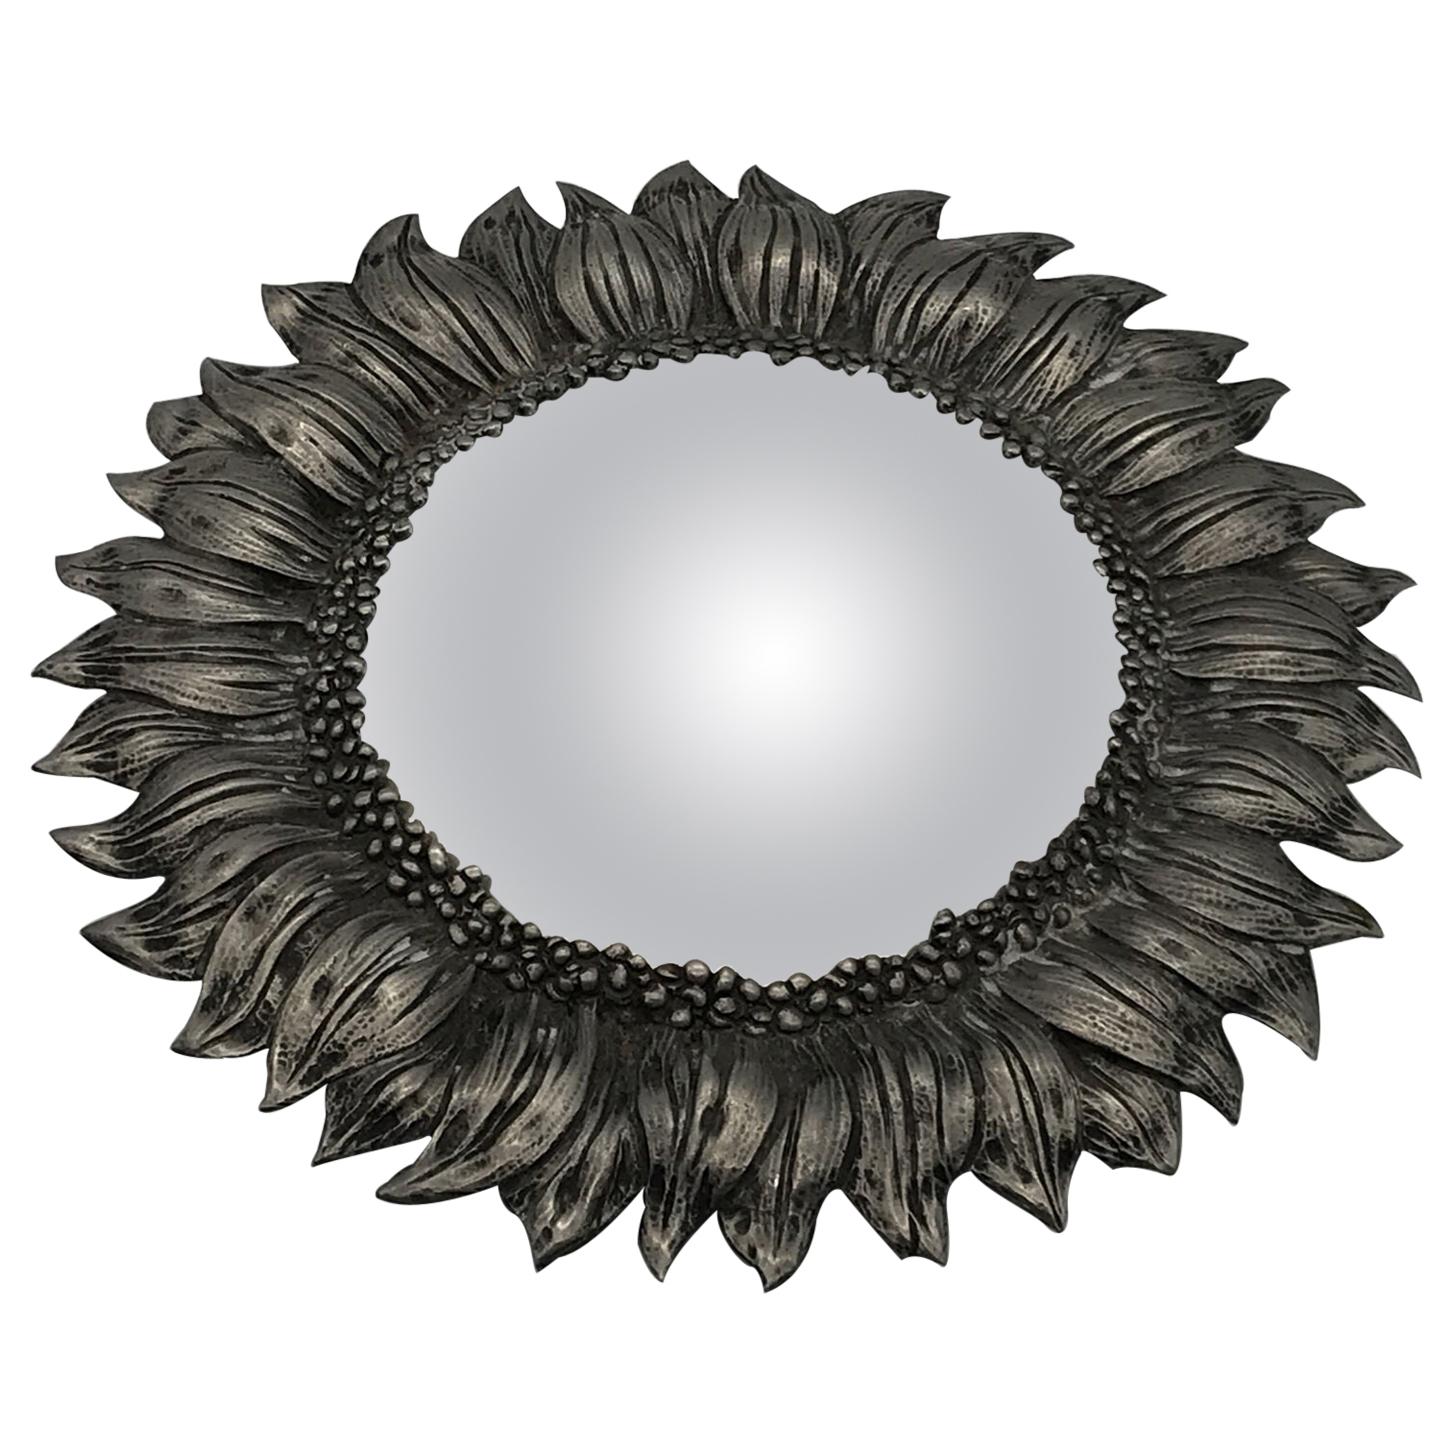 Small Convex Mirror in Silver Pewter, with Flower Decoration, circa 1960-1970